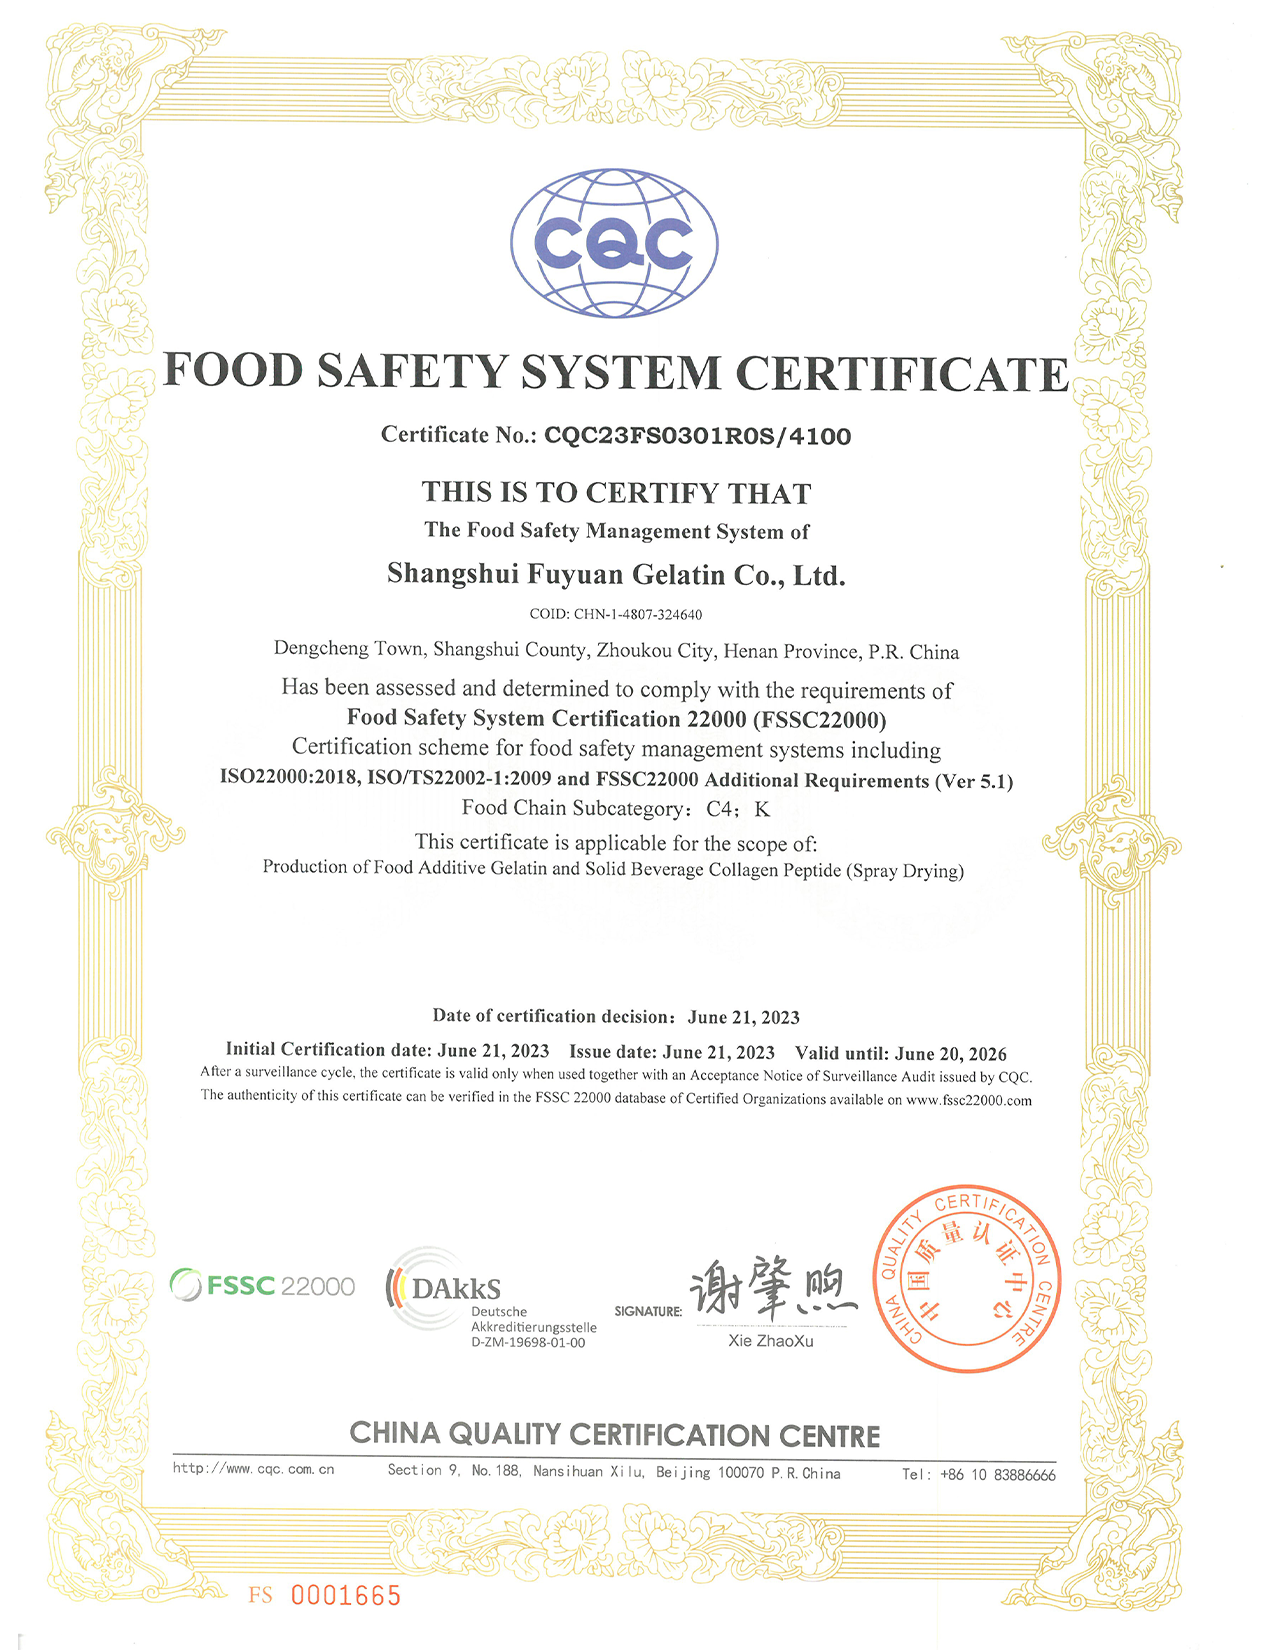 FOOD SAFETY SYSTEM CERTIFICATE